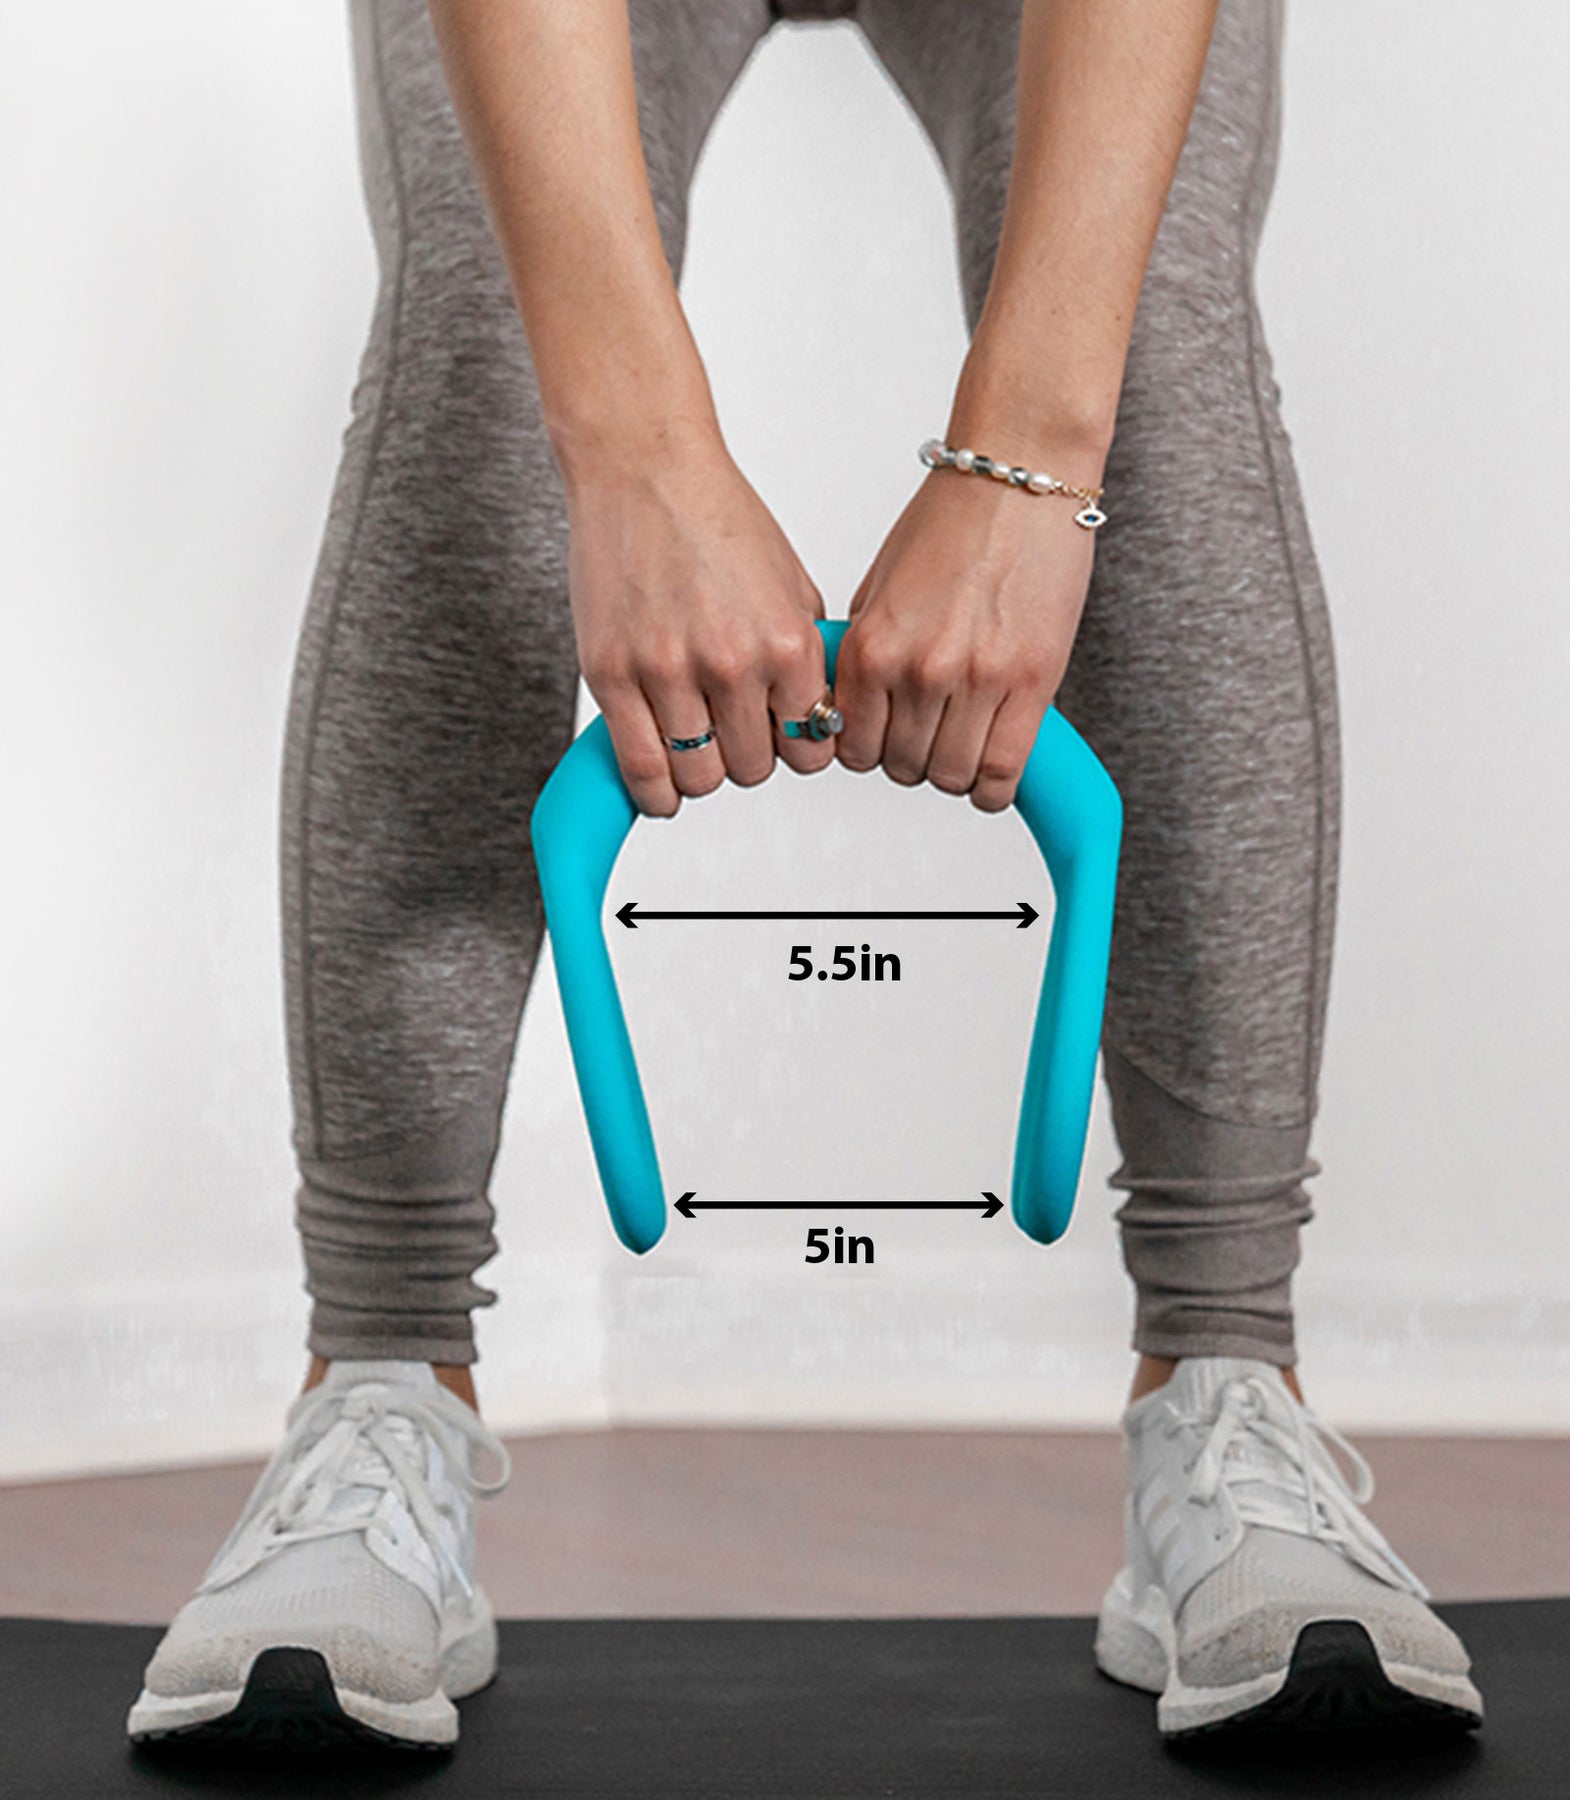 My Glute Workout Of The Day  You may be curious on the waist trainer brand  that I always wear. Yes! It is a superb brand from Australia - Slimtum. And  the